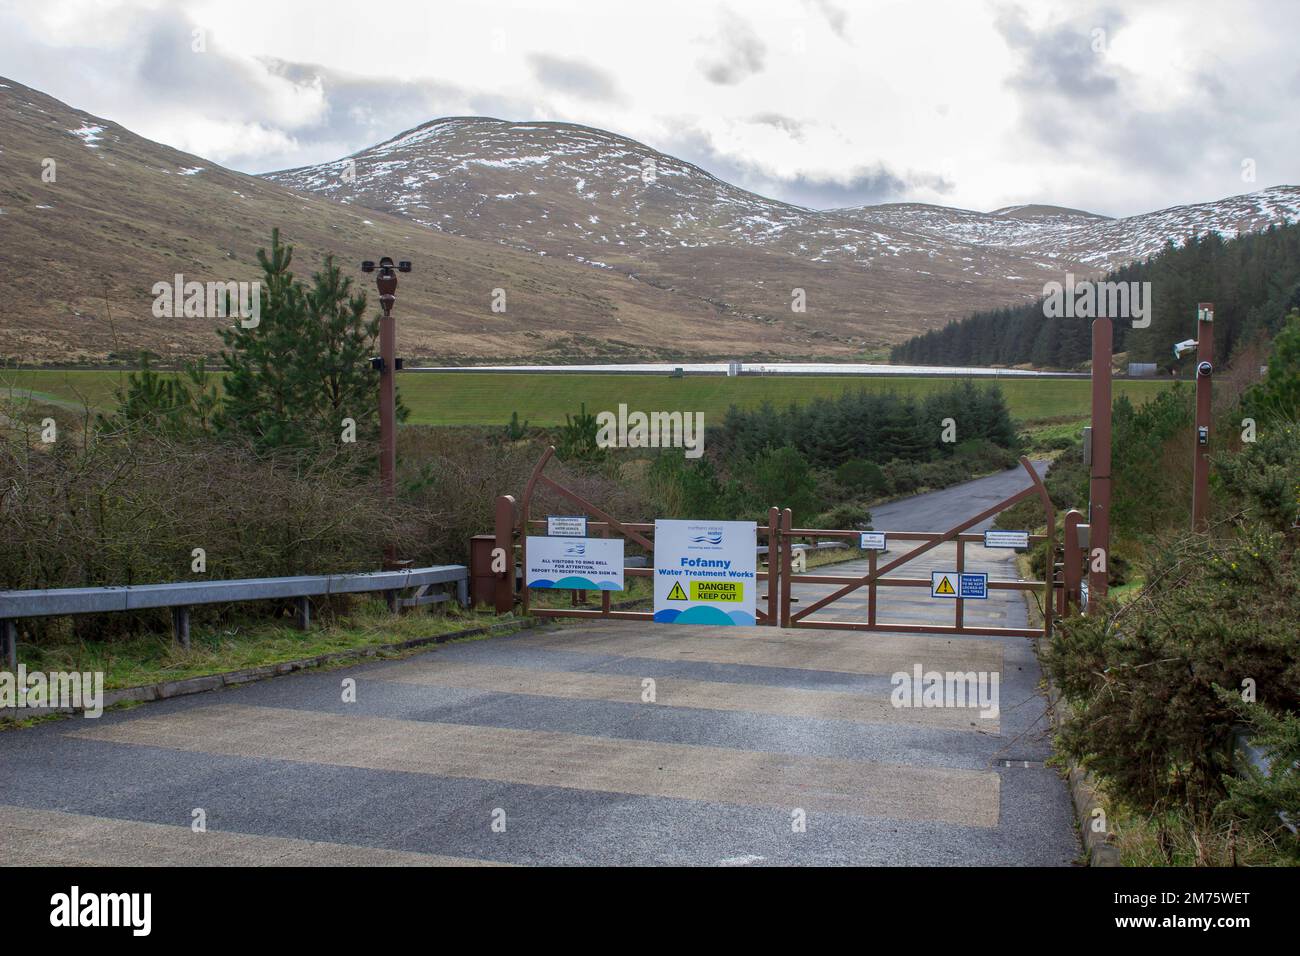 31 Jan 2018 The security gates at the entrance to the Fofanny Water treatment Works near Slieve Bernagh in the Western Mournes in county Down Northern Stock Photo